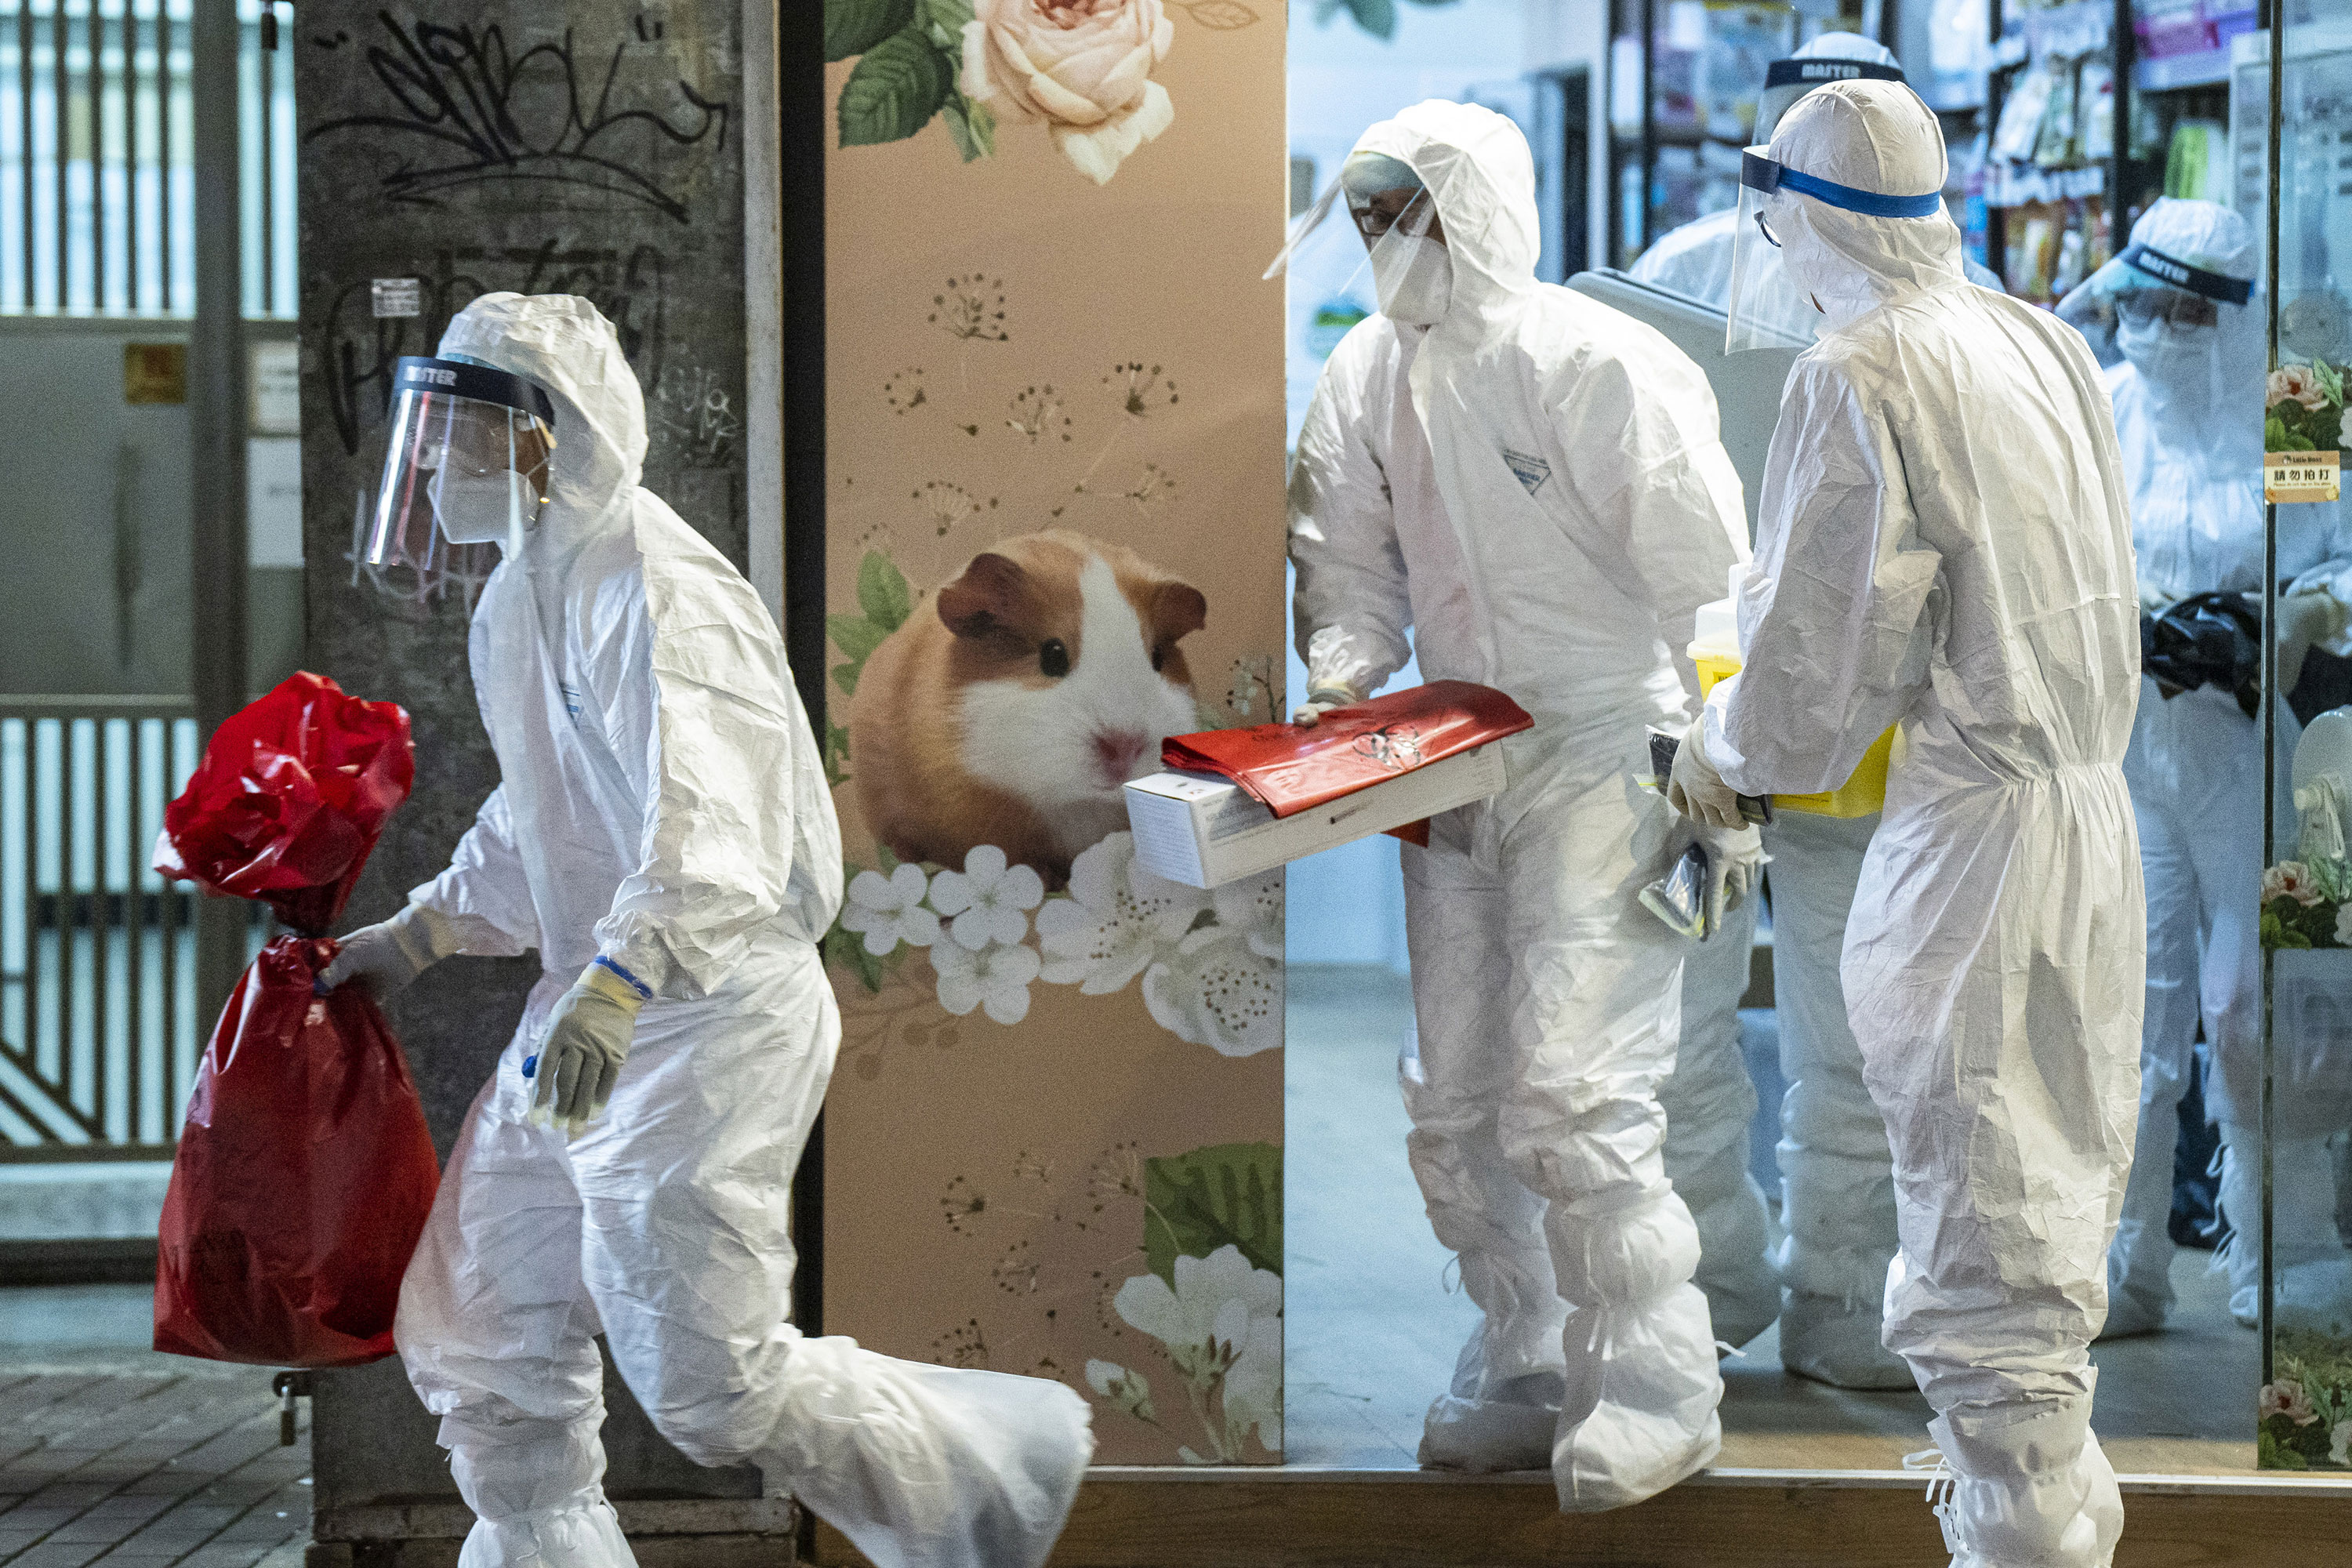 Workers with Hong Kong's Agriculture, Fisheries and Conservation Department remove small animals from a pet store in Hong Kong on January 18.